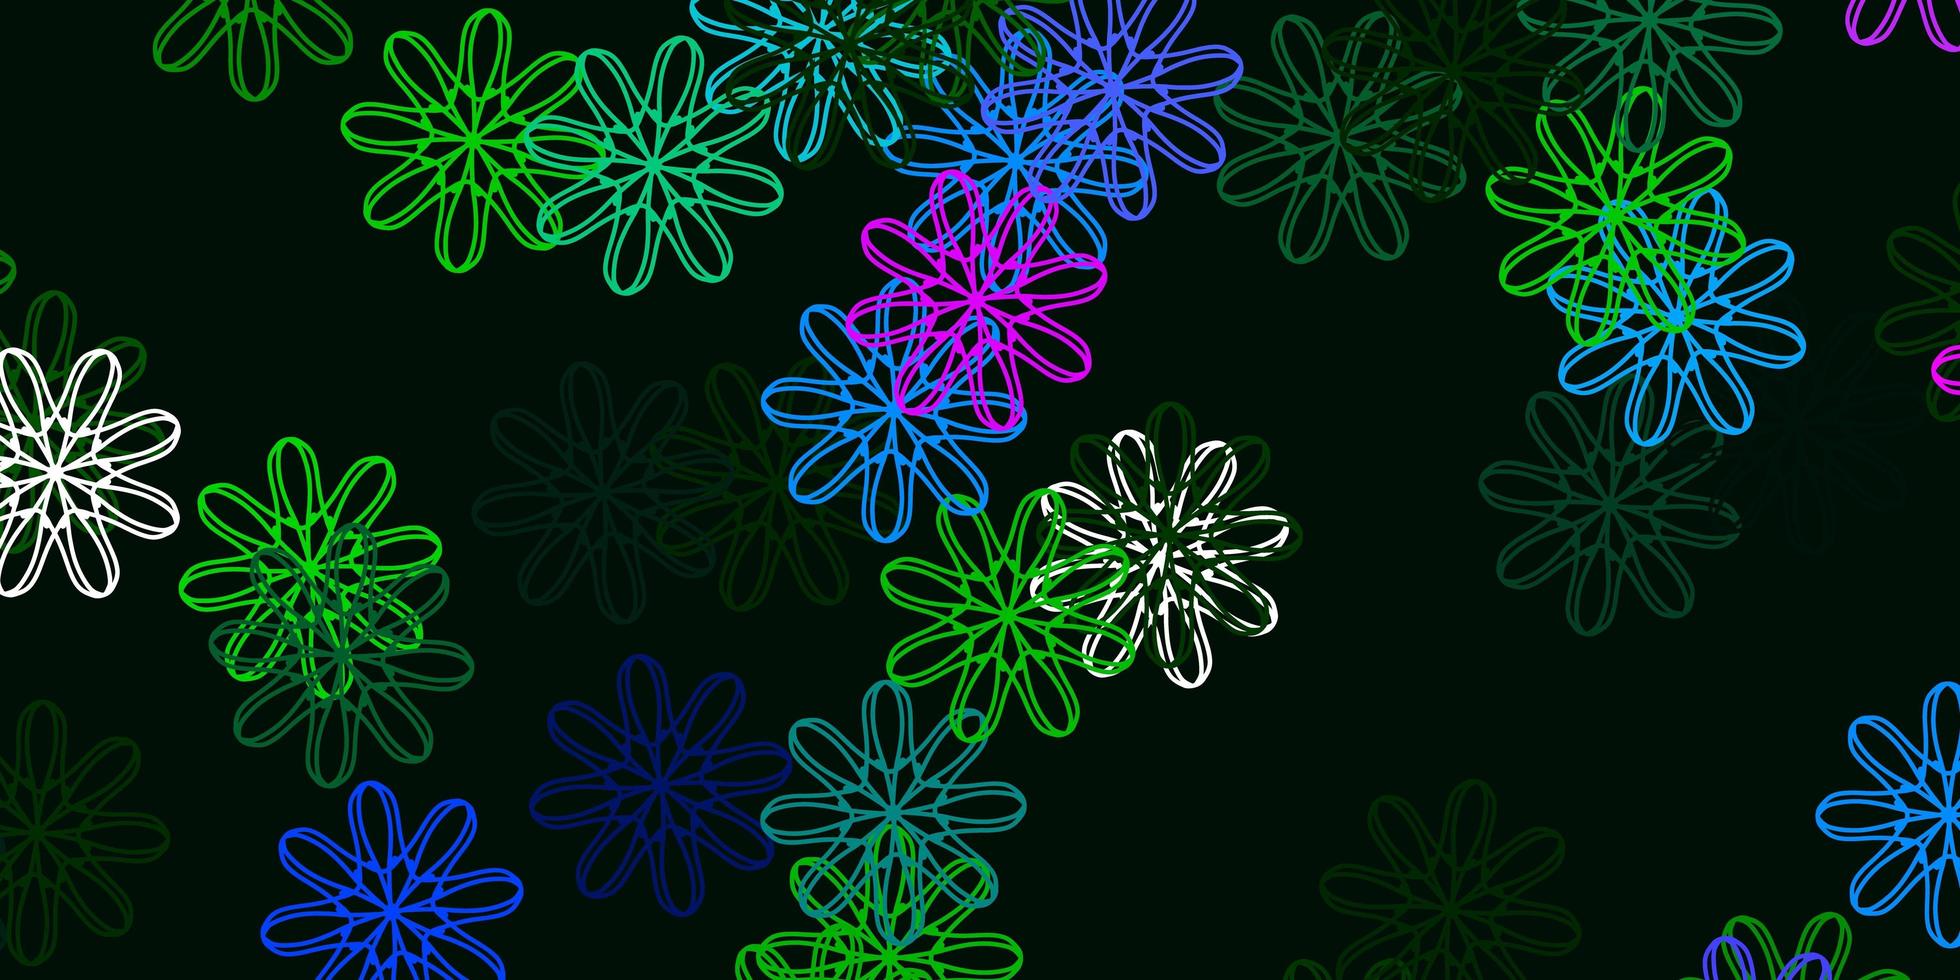 Light Pink, Green vector doodle background with flowers.